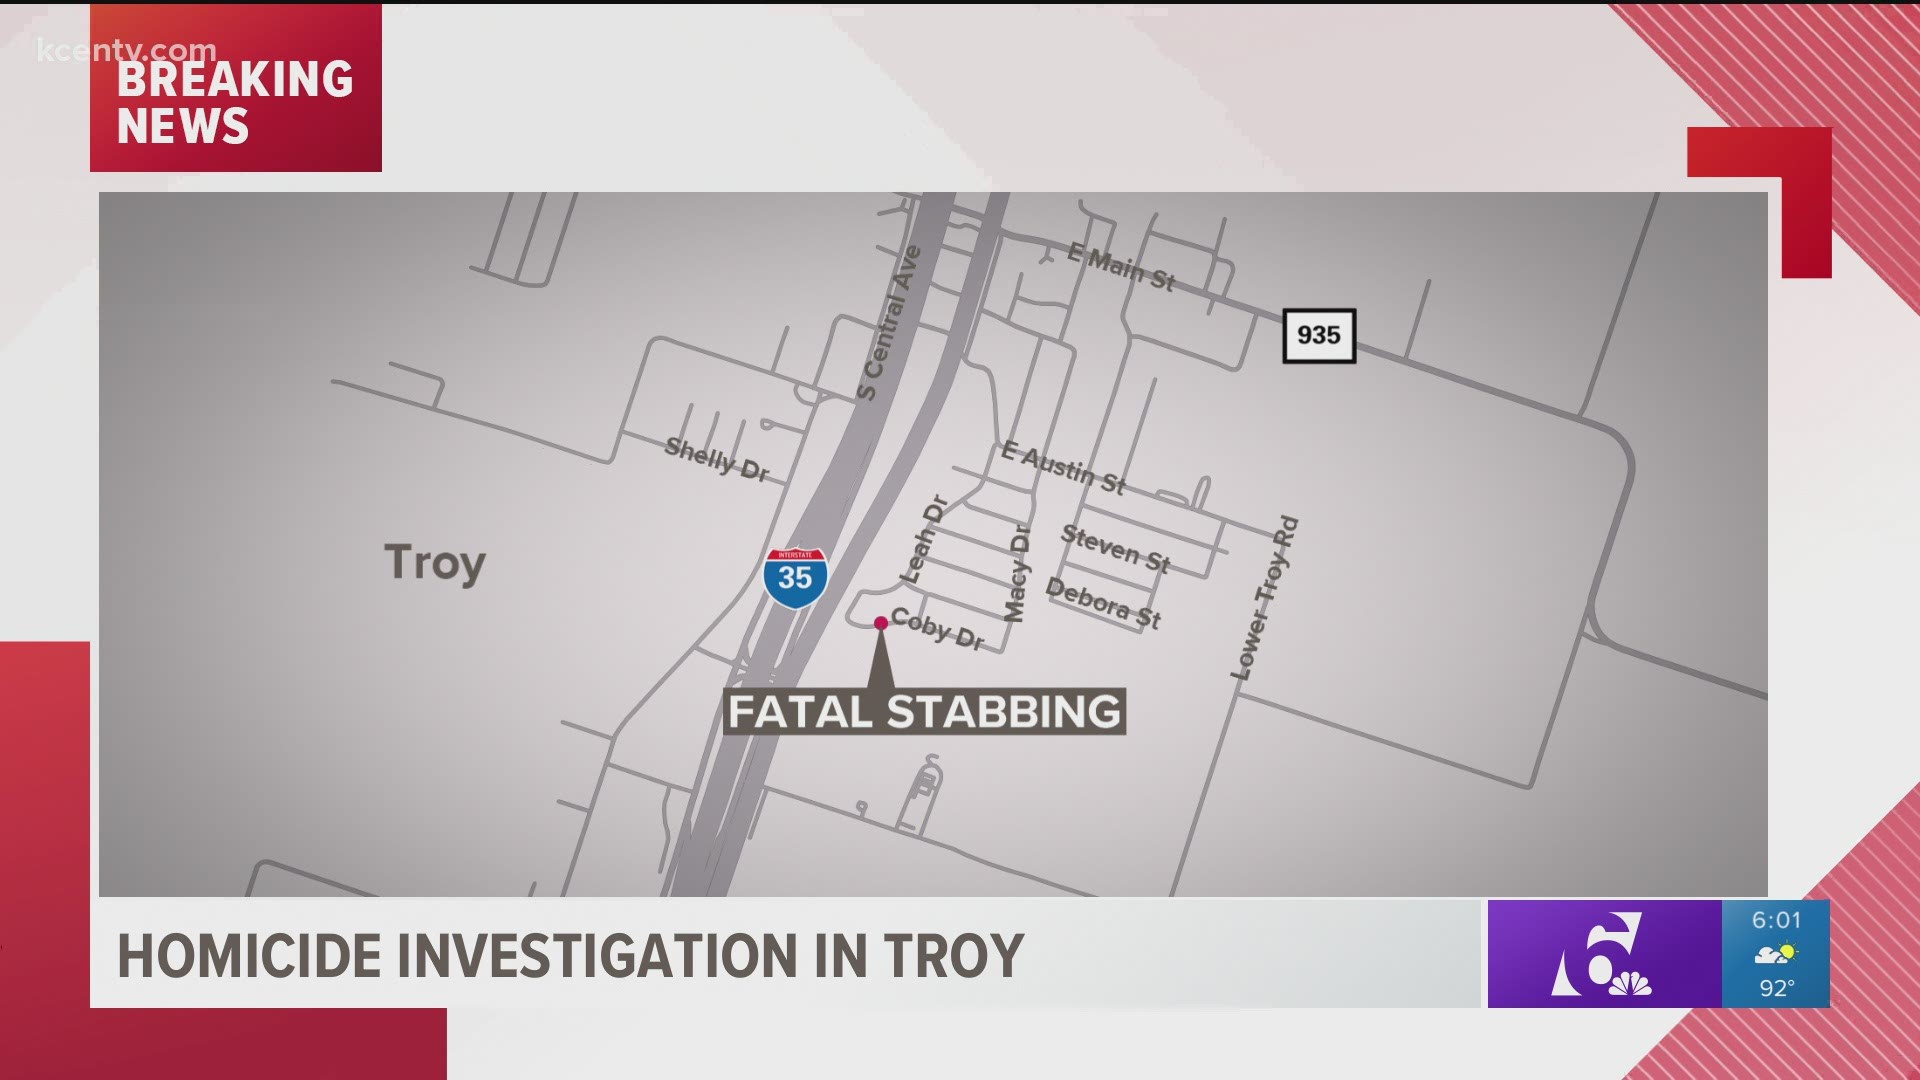 Troy police said they found the 58-year-old man at a home in the 200 block of Coby Drive.